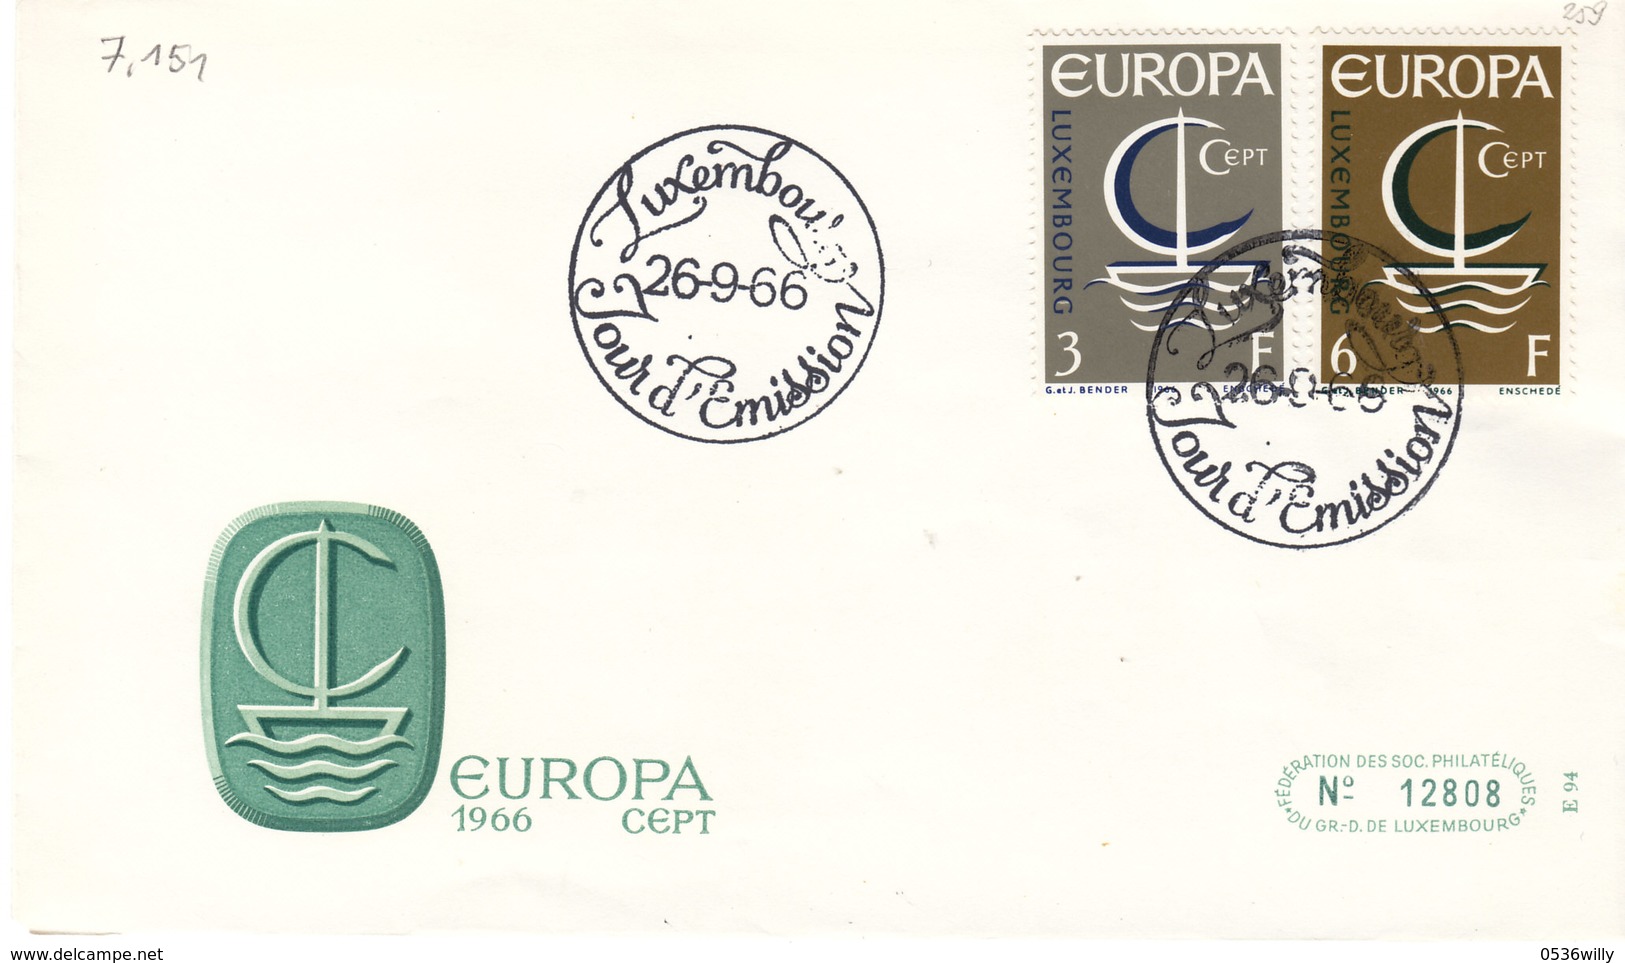 L-Luxembourg 1966. FDC  Luxemburg EUROPA (7.151) - FDC